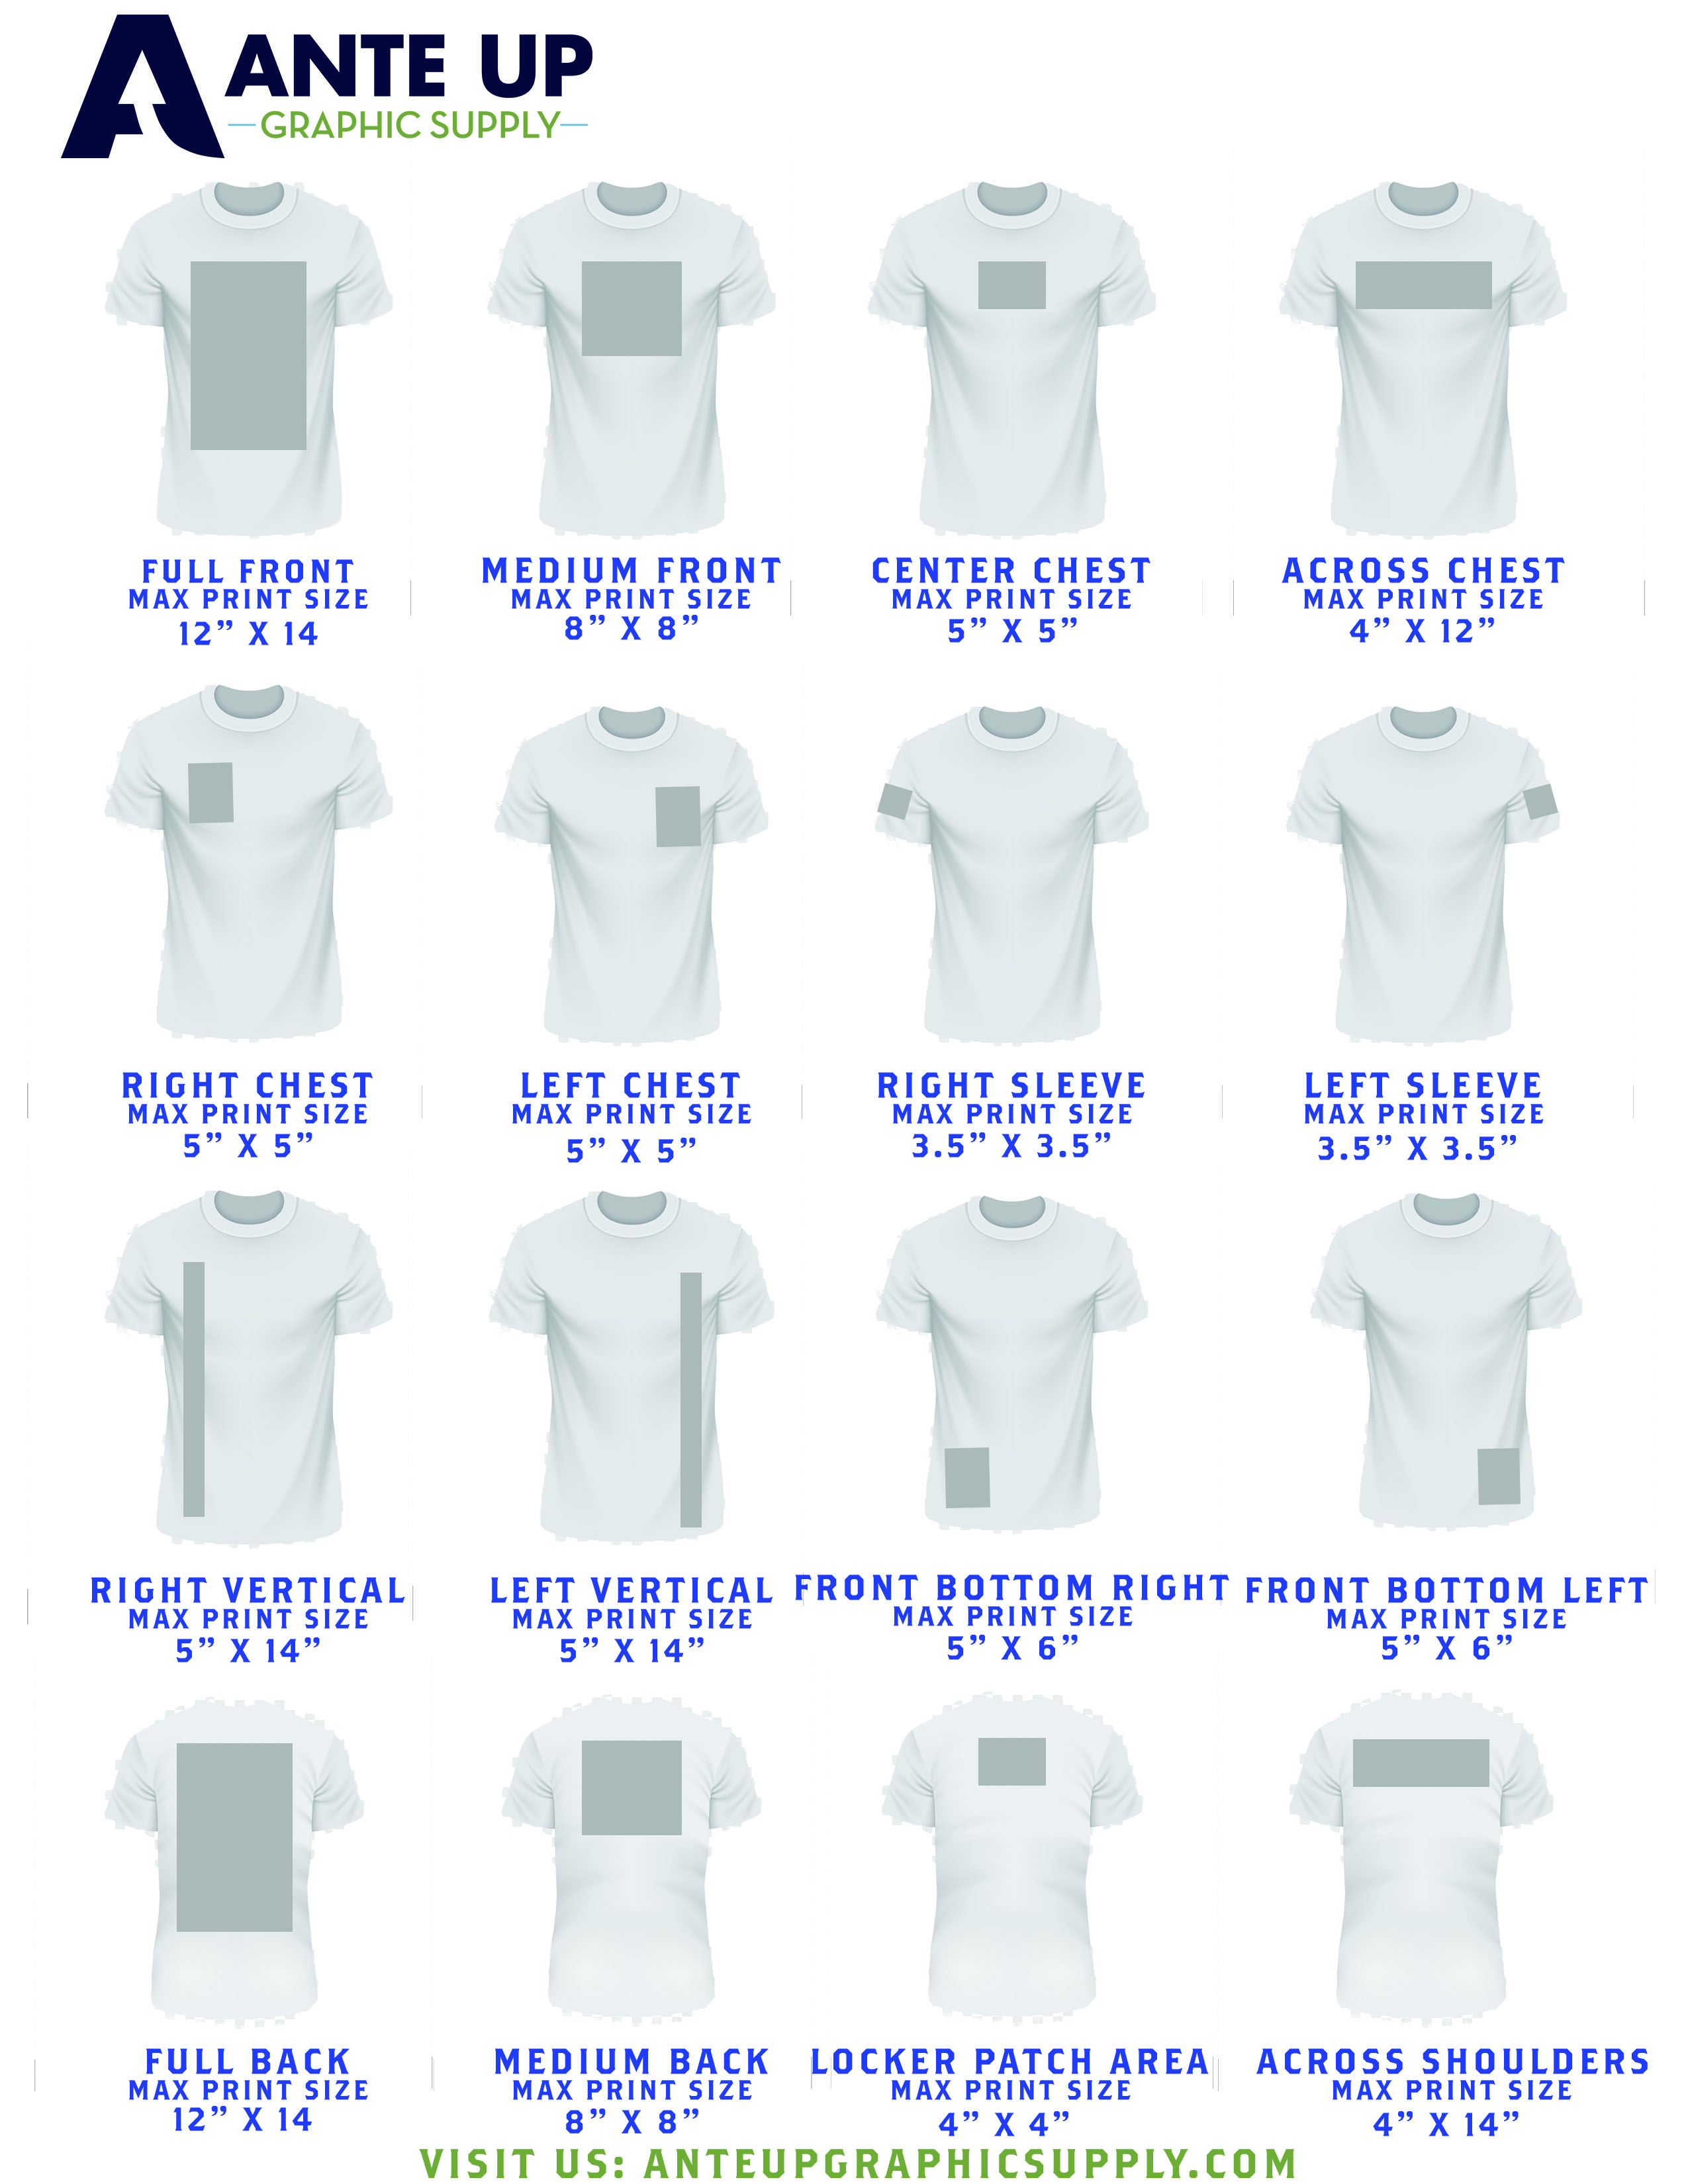 TShirt Design Size and Placement Chart Ante Up Graphic Supply